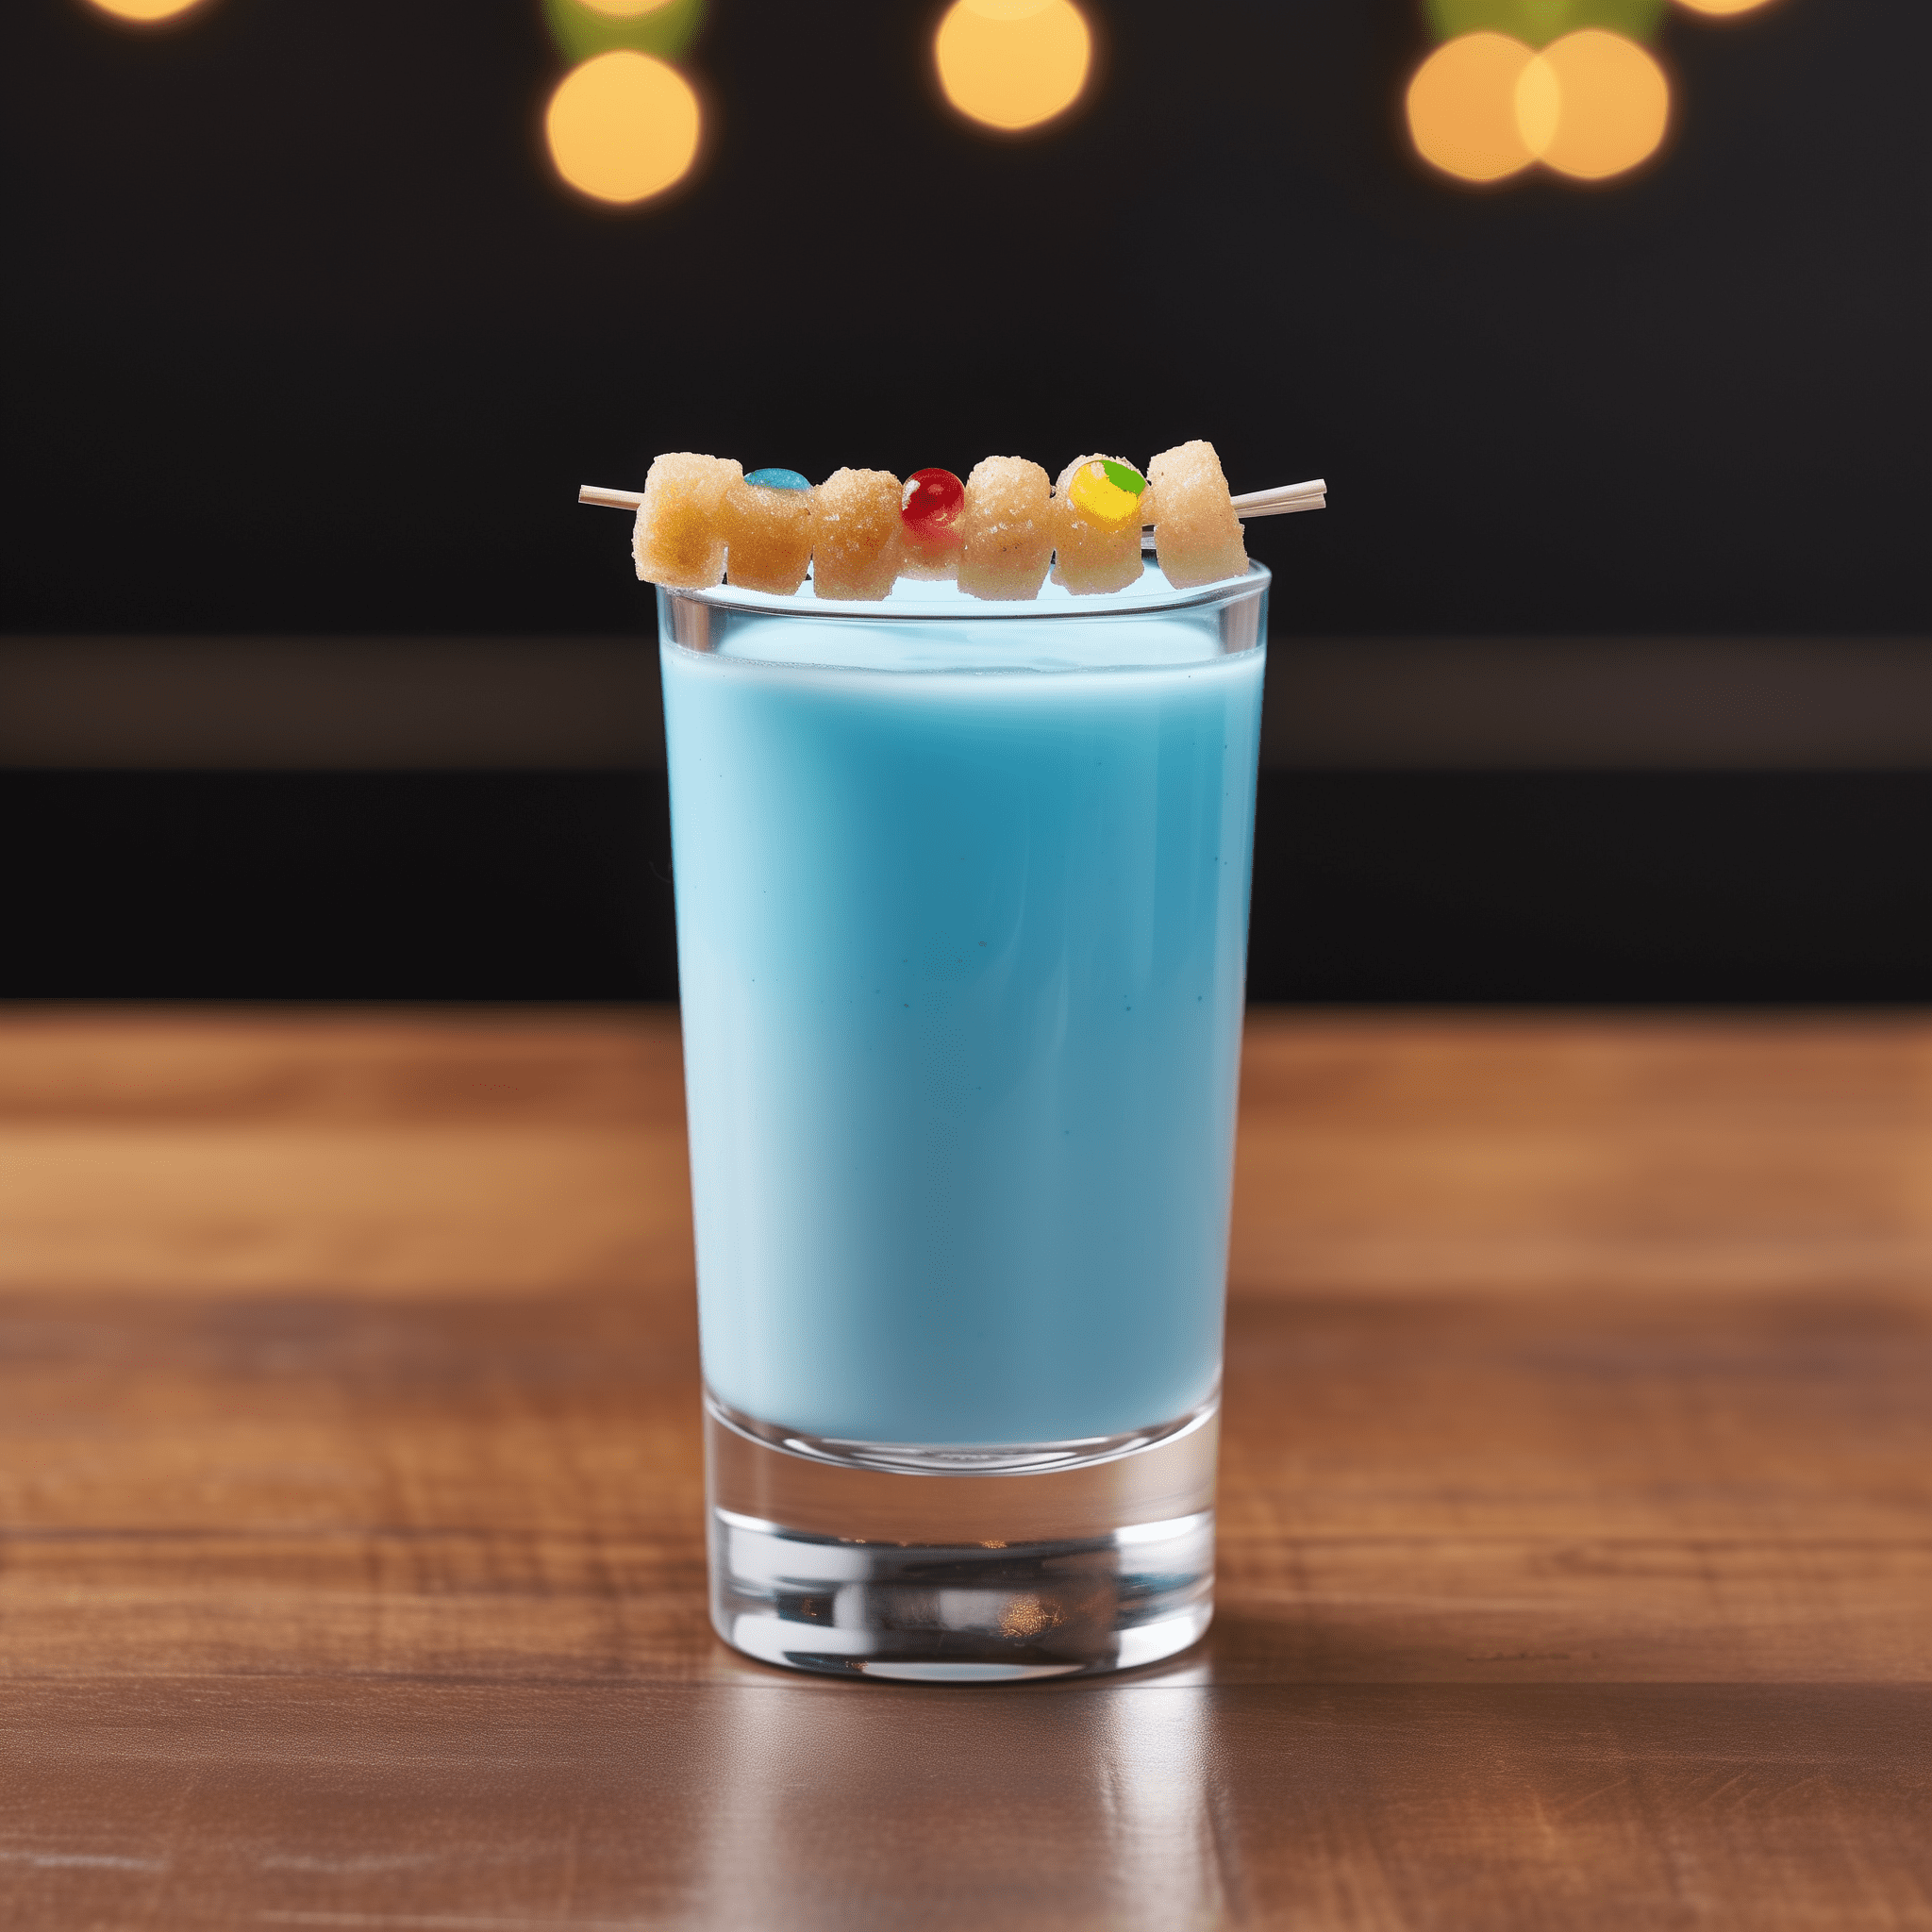 The Froot Loop Shot is sweet and creamy, with a fruity undertone that's surprisingly reminiscent of the cereal. The amaretto adds a nutty depth, while the blue curacao gives it a citrus kick.